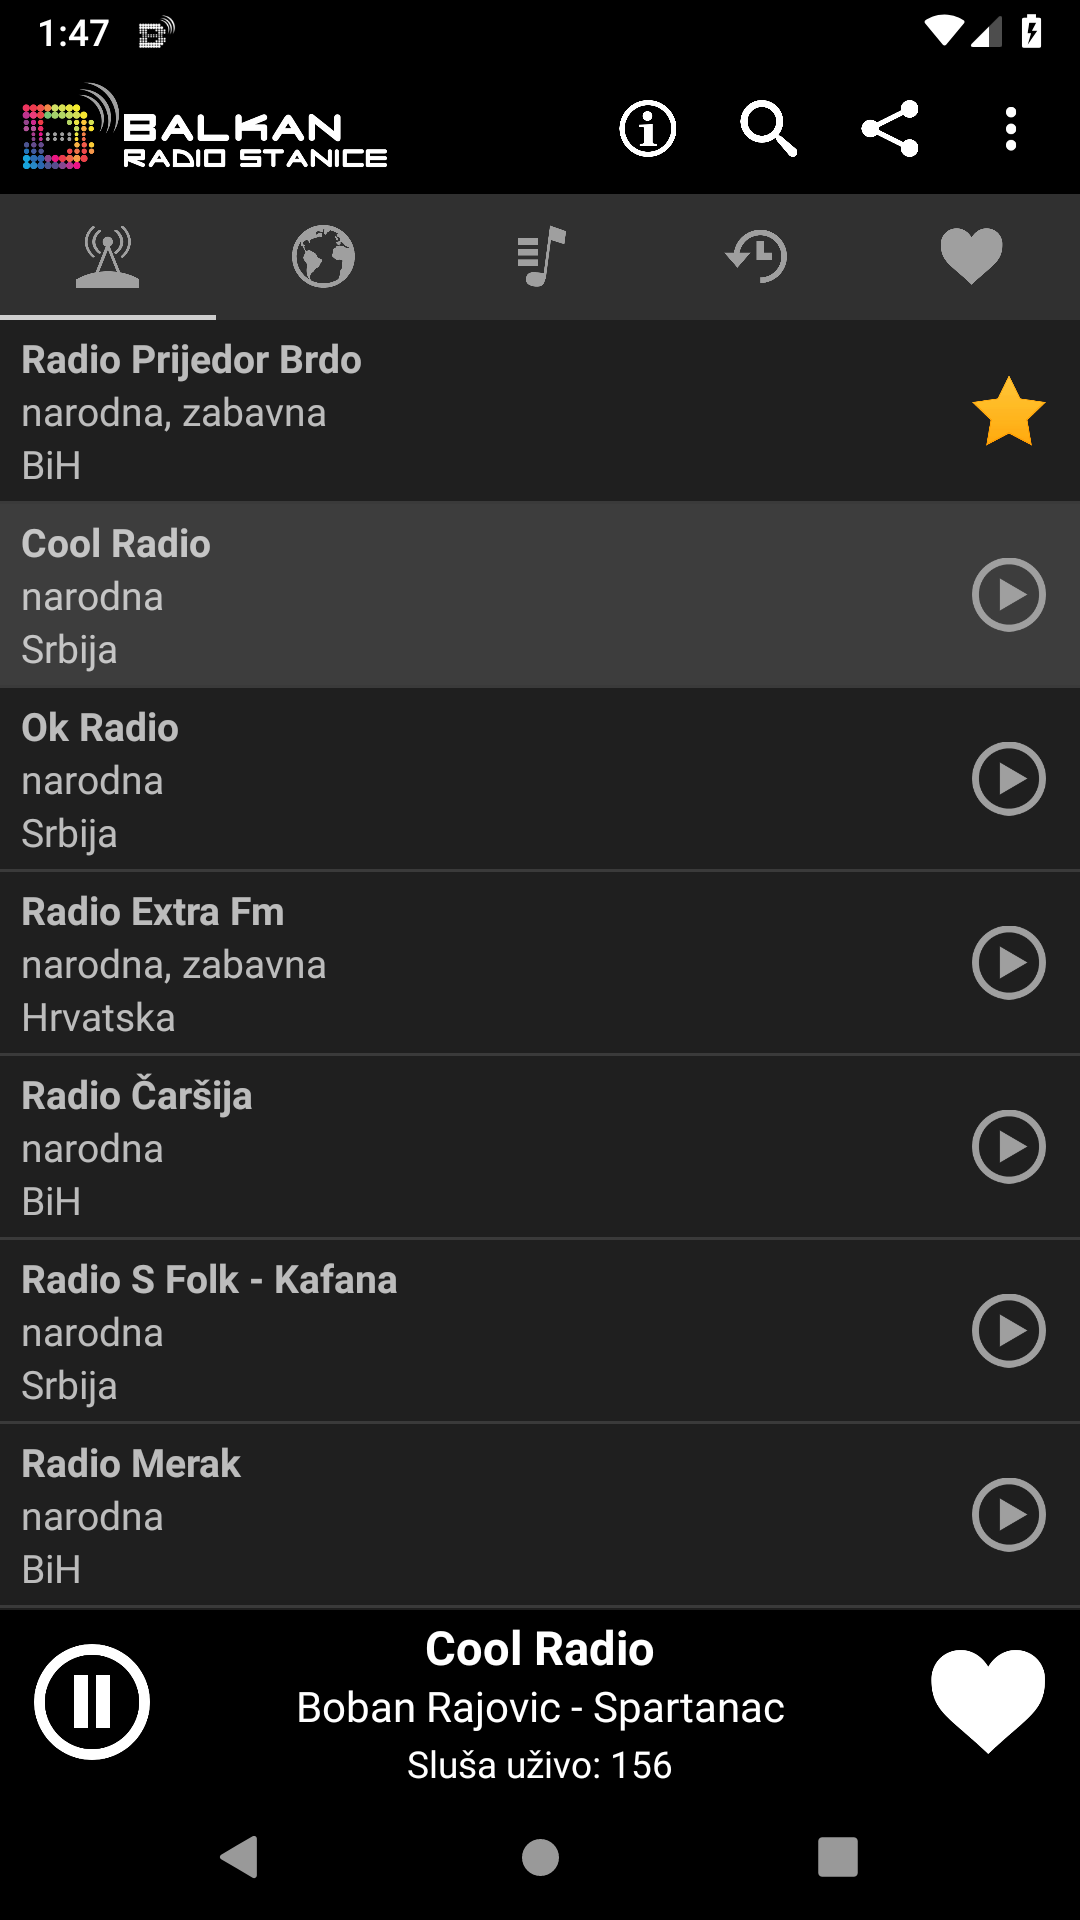 Balkan Radio Stanice APK 3.3.2 for Android – Download Balkan Radio Stanice  XAPK (APK Bundle) Latest Version from APKFab.com